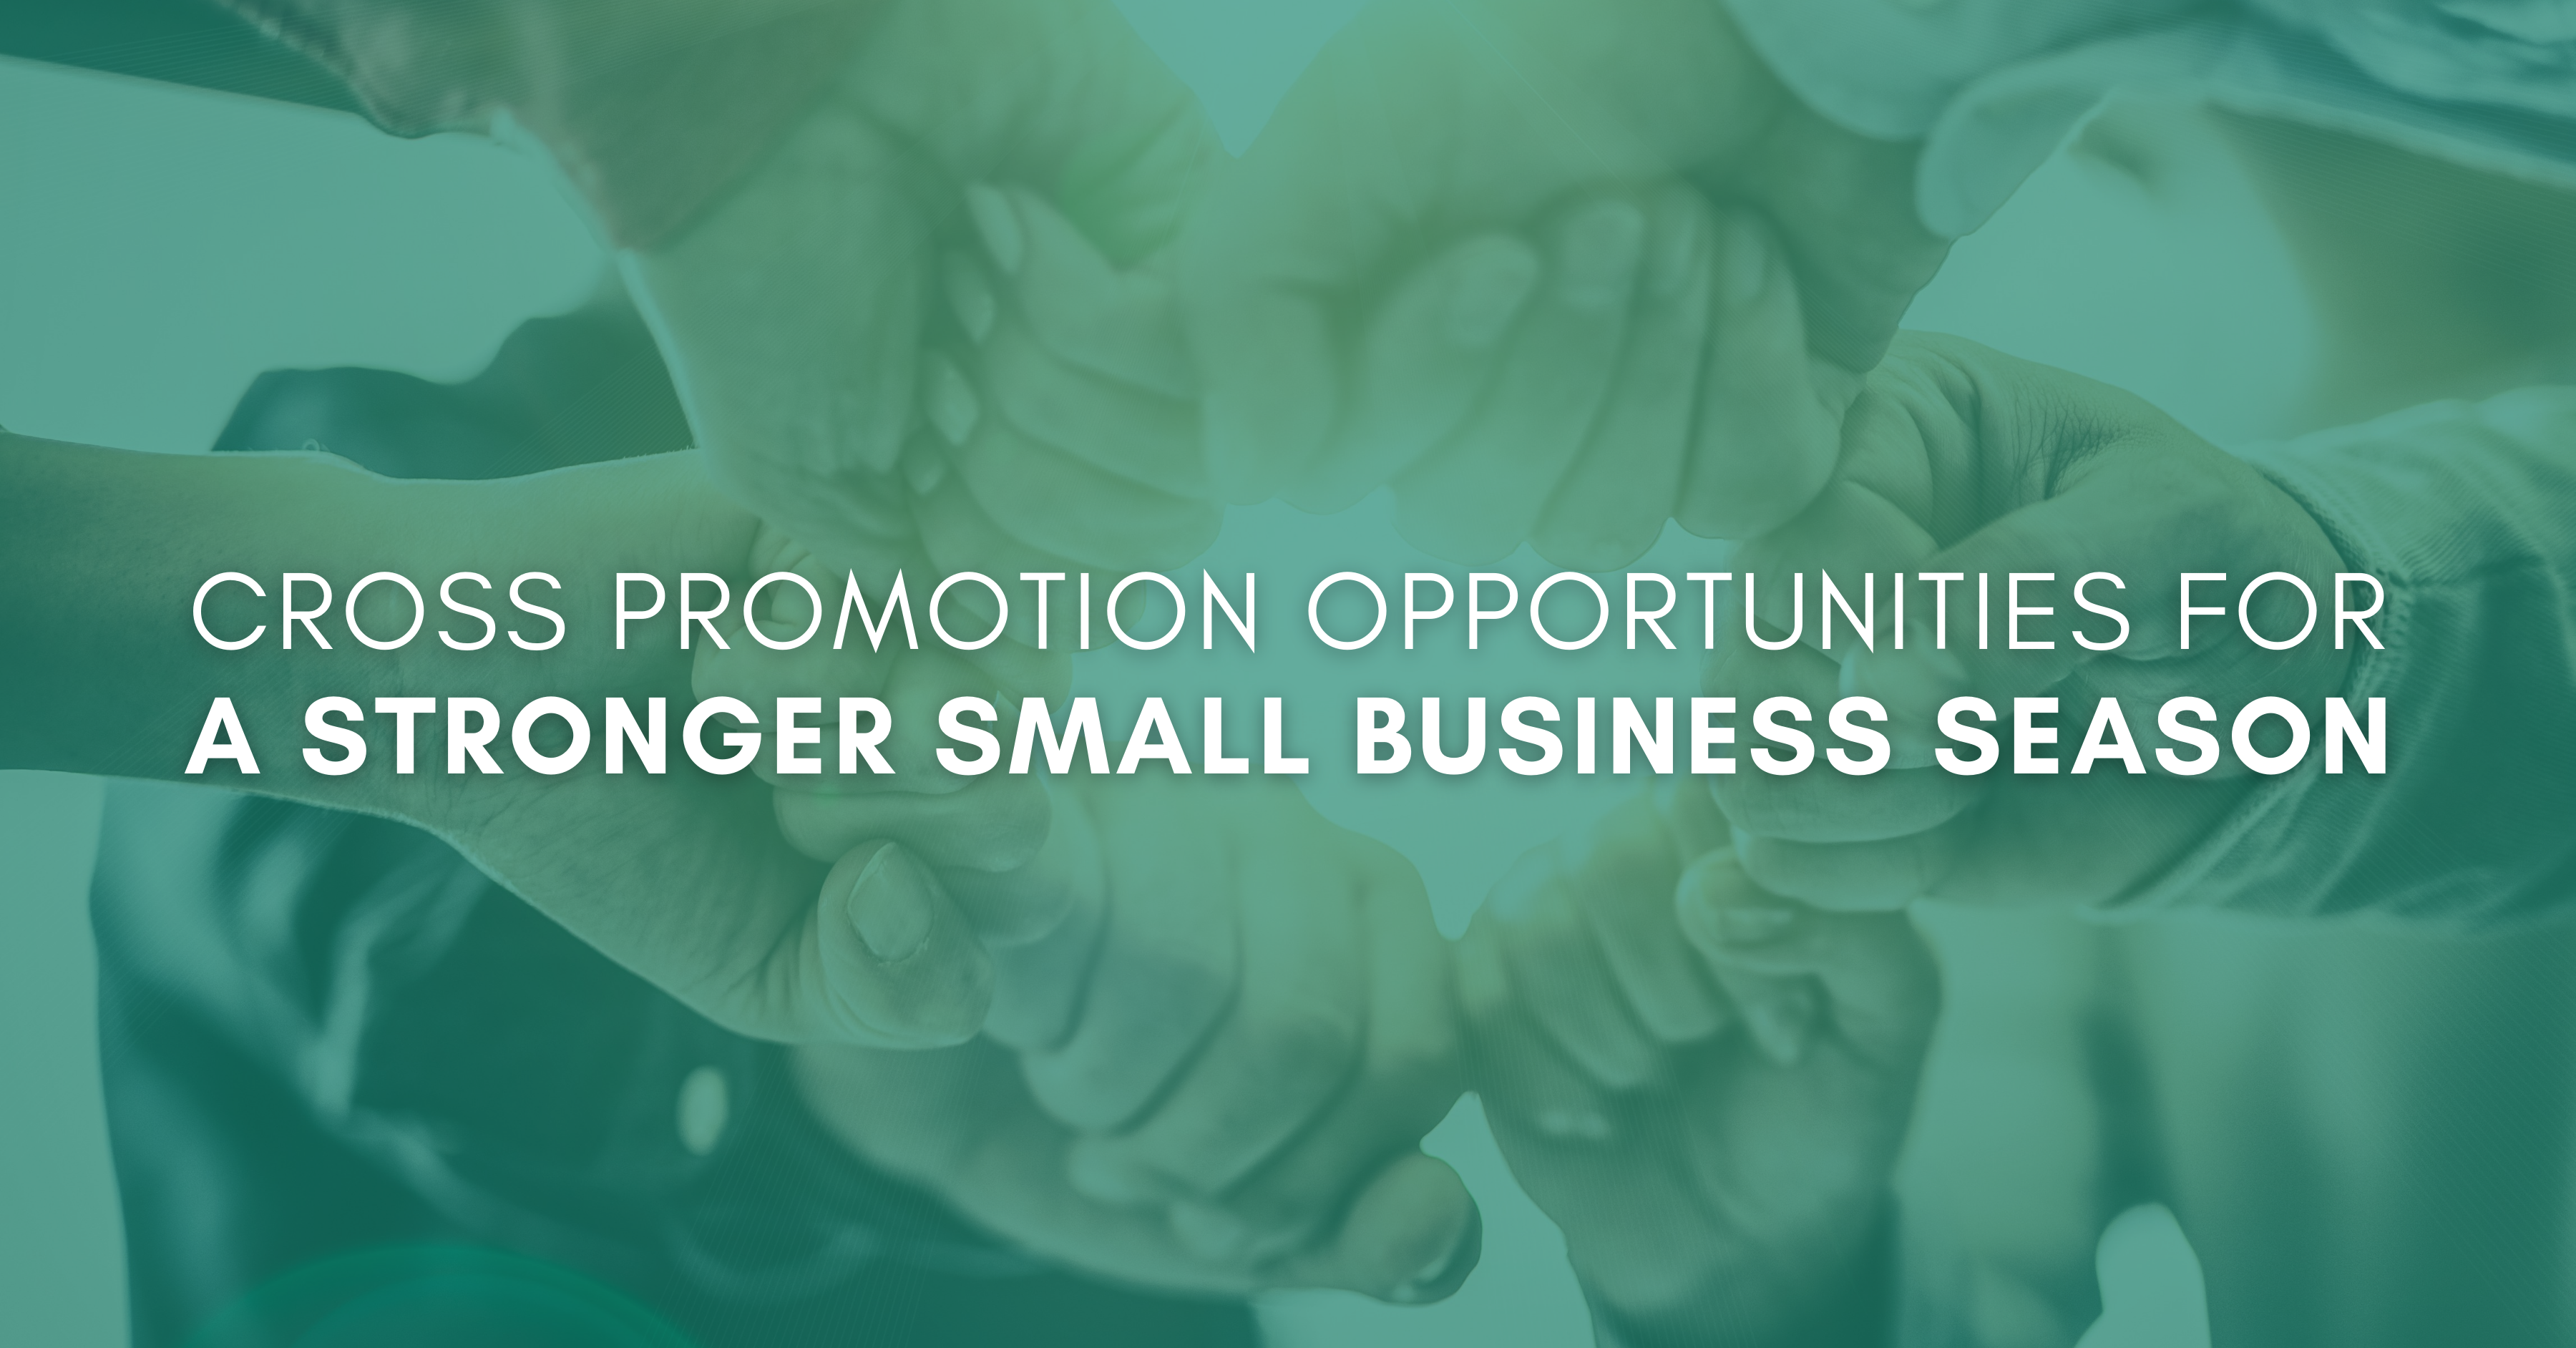 Image for Cross Promotion Opportunities for a Stronger Small Business Season